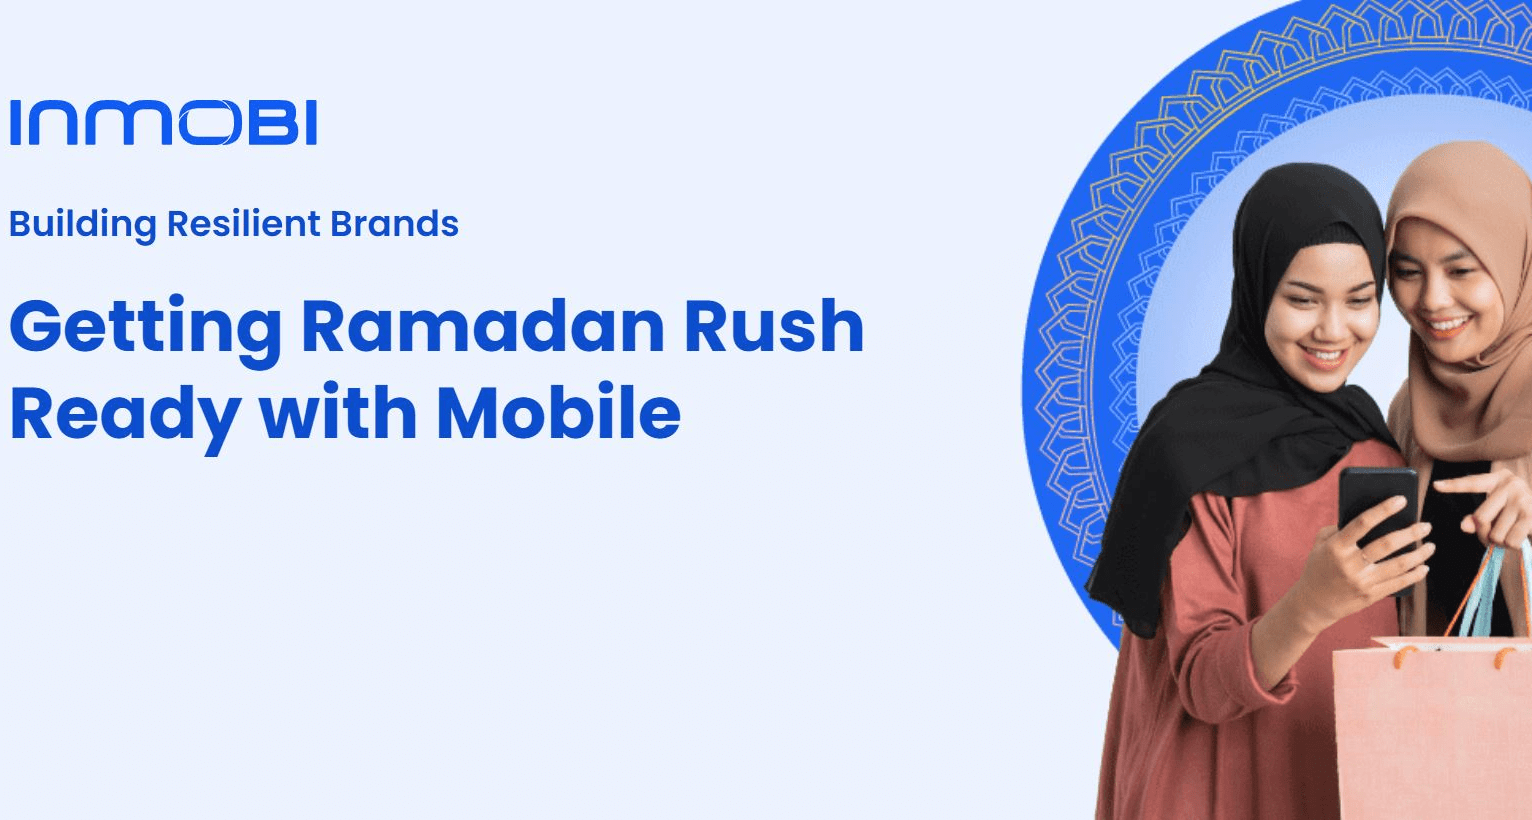 Event Diary | Building Resilient Brands Summit: Getting Ramadan Rush Ready with Mobile 